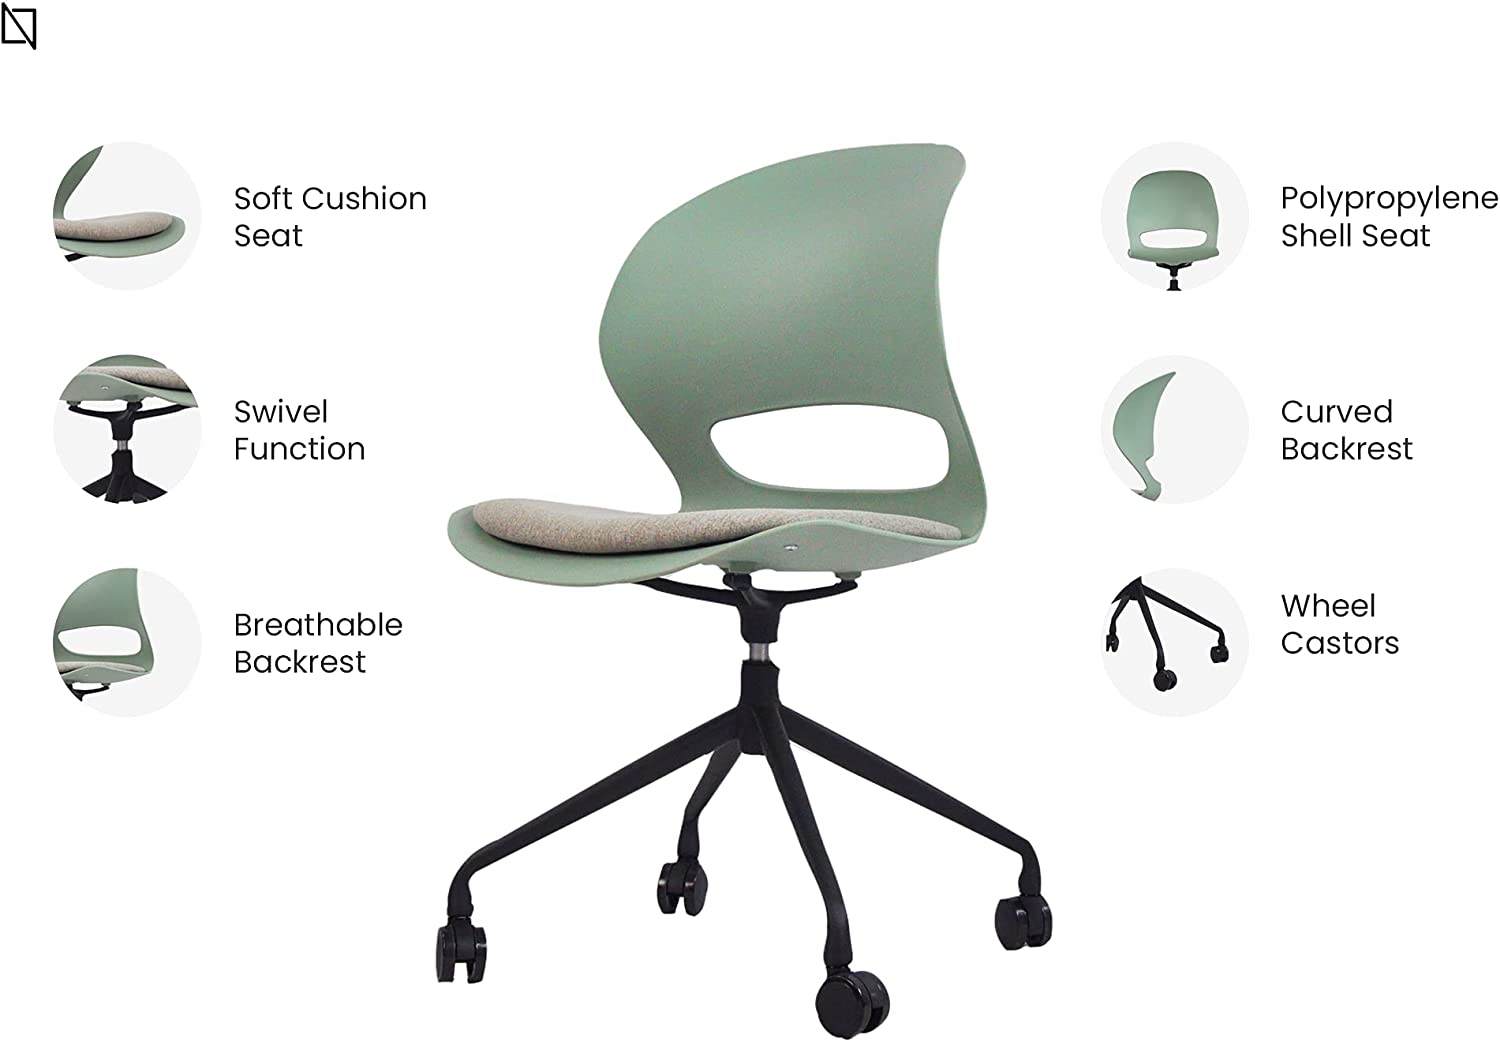 VIS Chairs by Navodesk Specifications - Navodesk